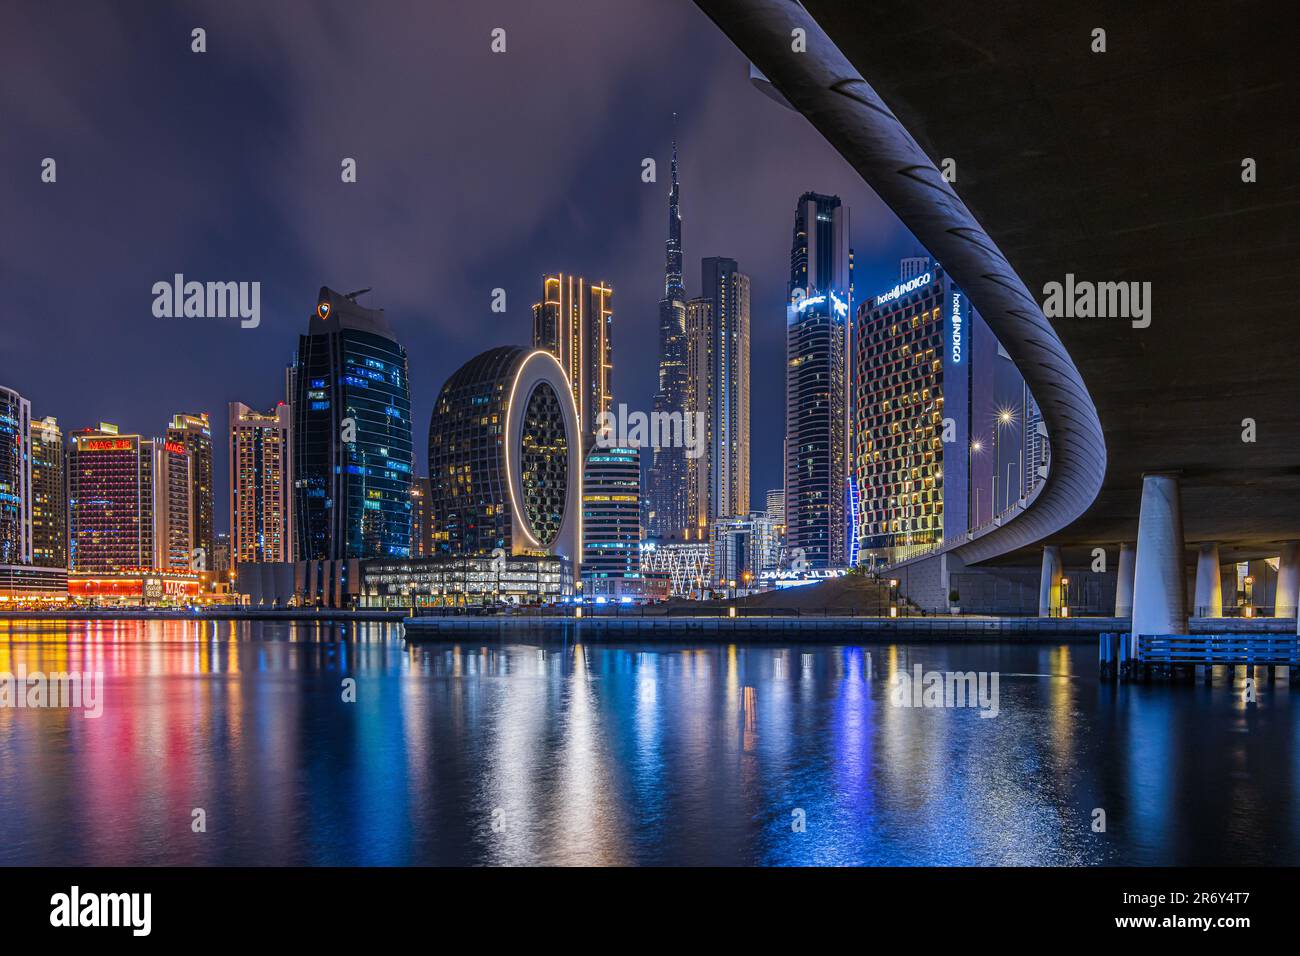 View of the Dubai skyline at night. Financial center of the city in United Arab Emirates. Skyscrapers illuminated at the blue hour with curved course Stock Photo